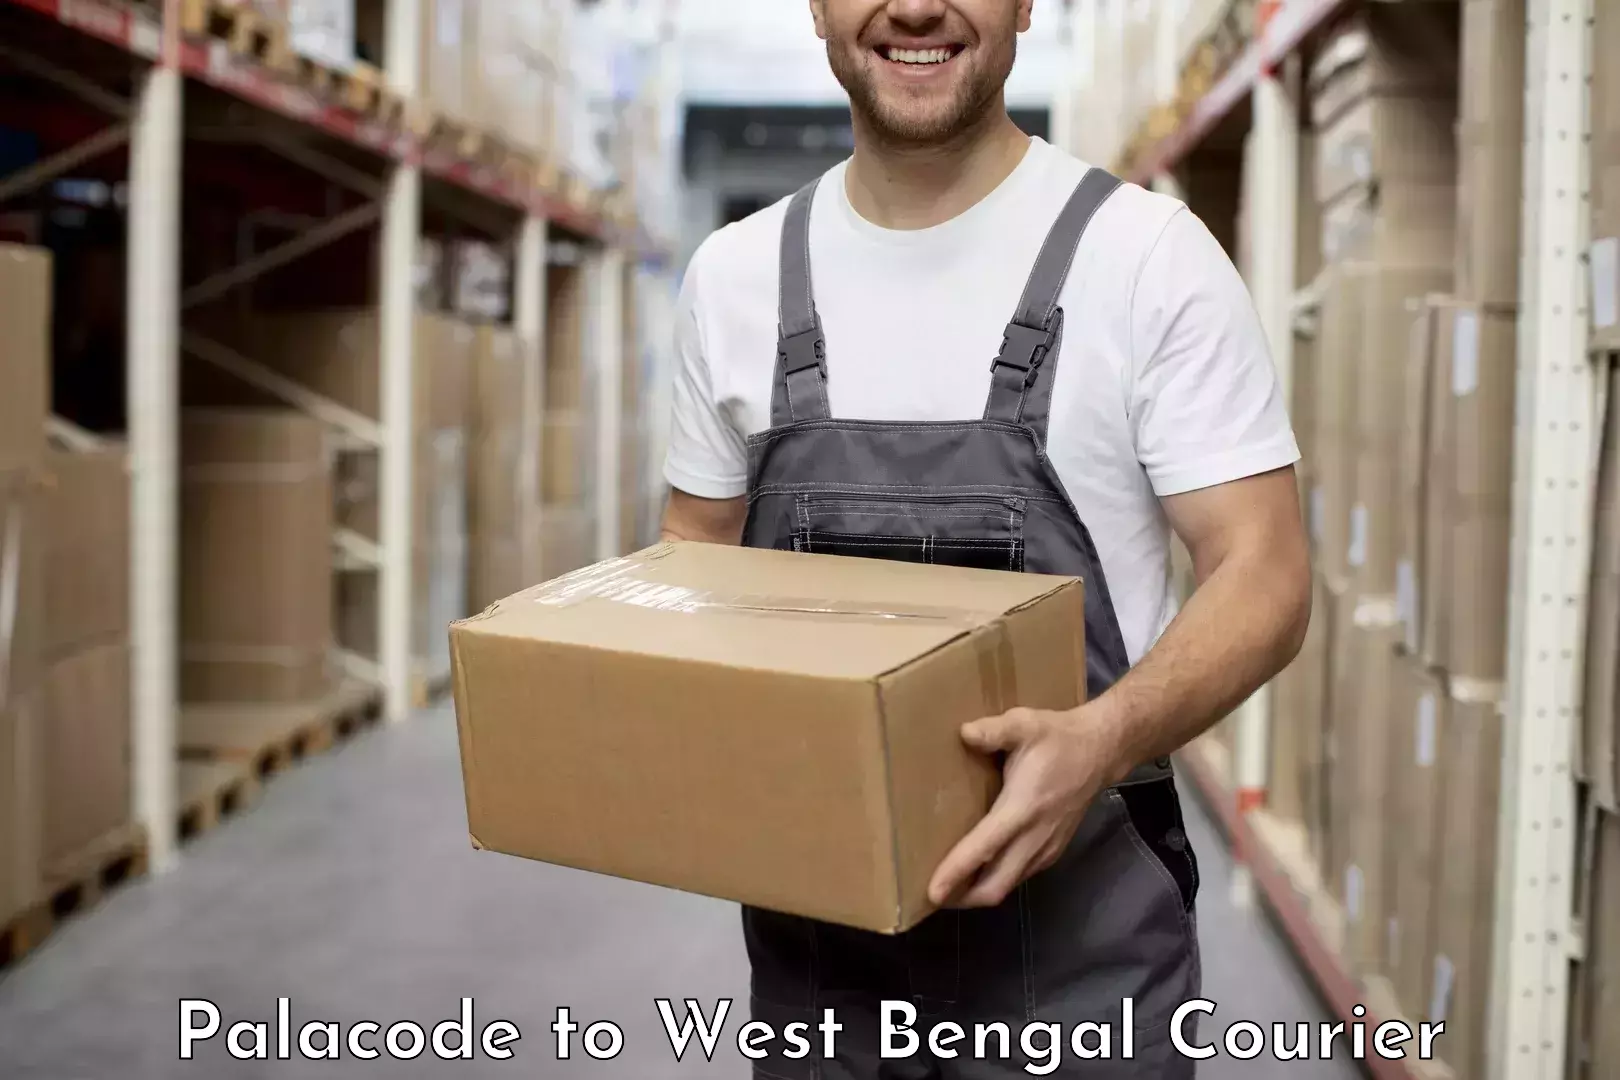 Courier service comparison Palacode to West Bengal